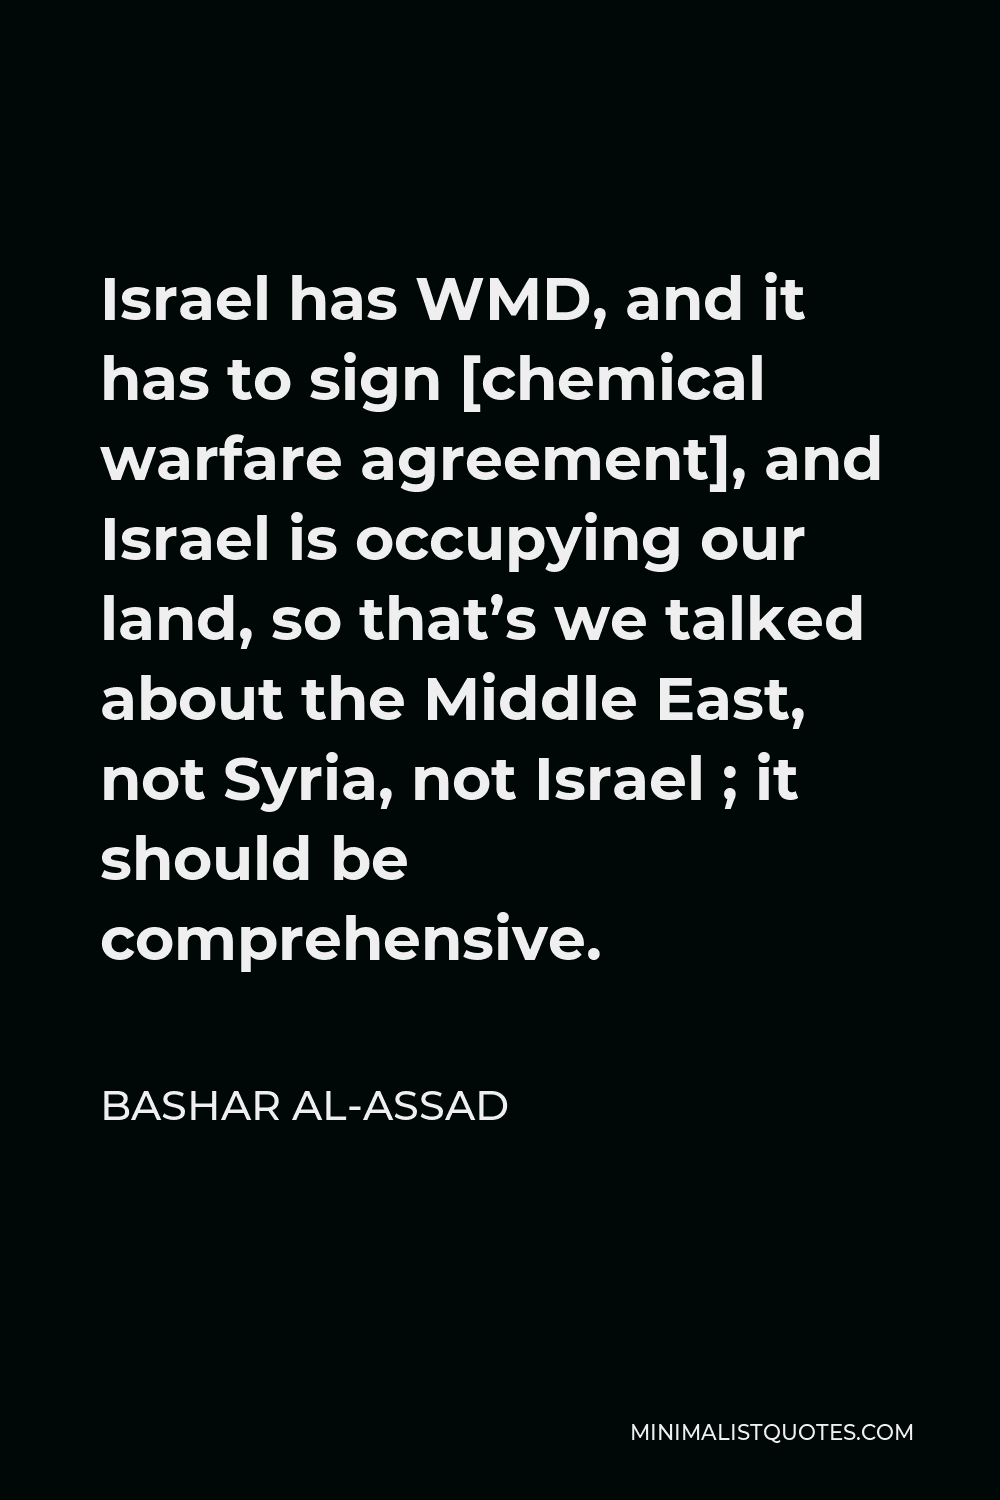 Bashar al-Assad Quote - Israel has WMD, and it has to sign [chemical warfare agreement], and Israel is occupying our land, so that’s we talked about the Middle East, not Syria, not Israel ; it should be comprehensive.